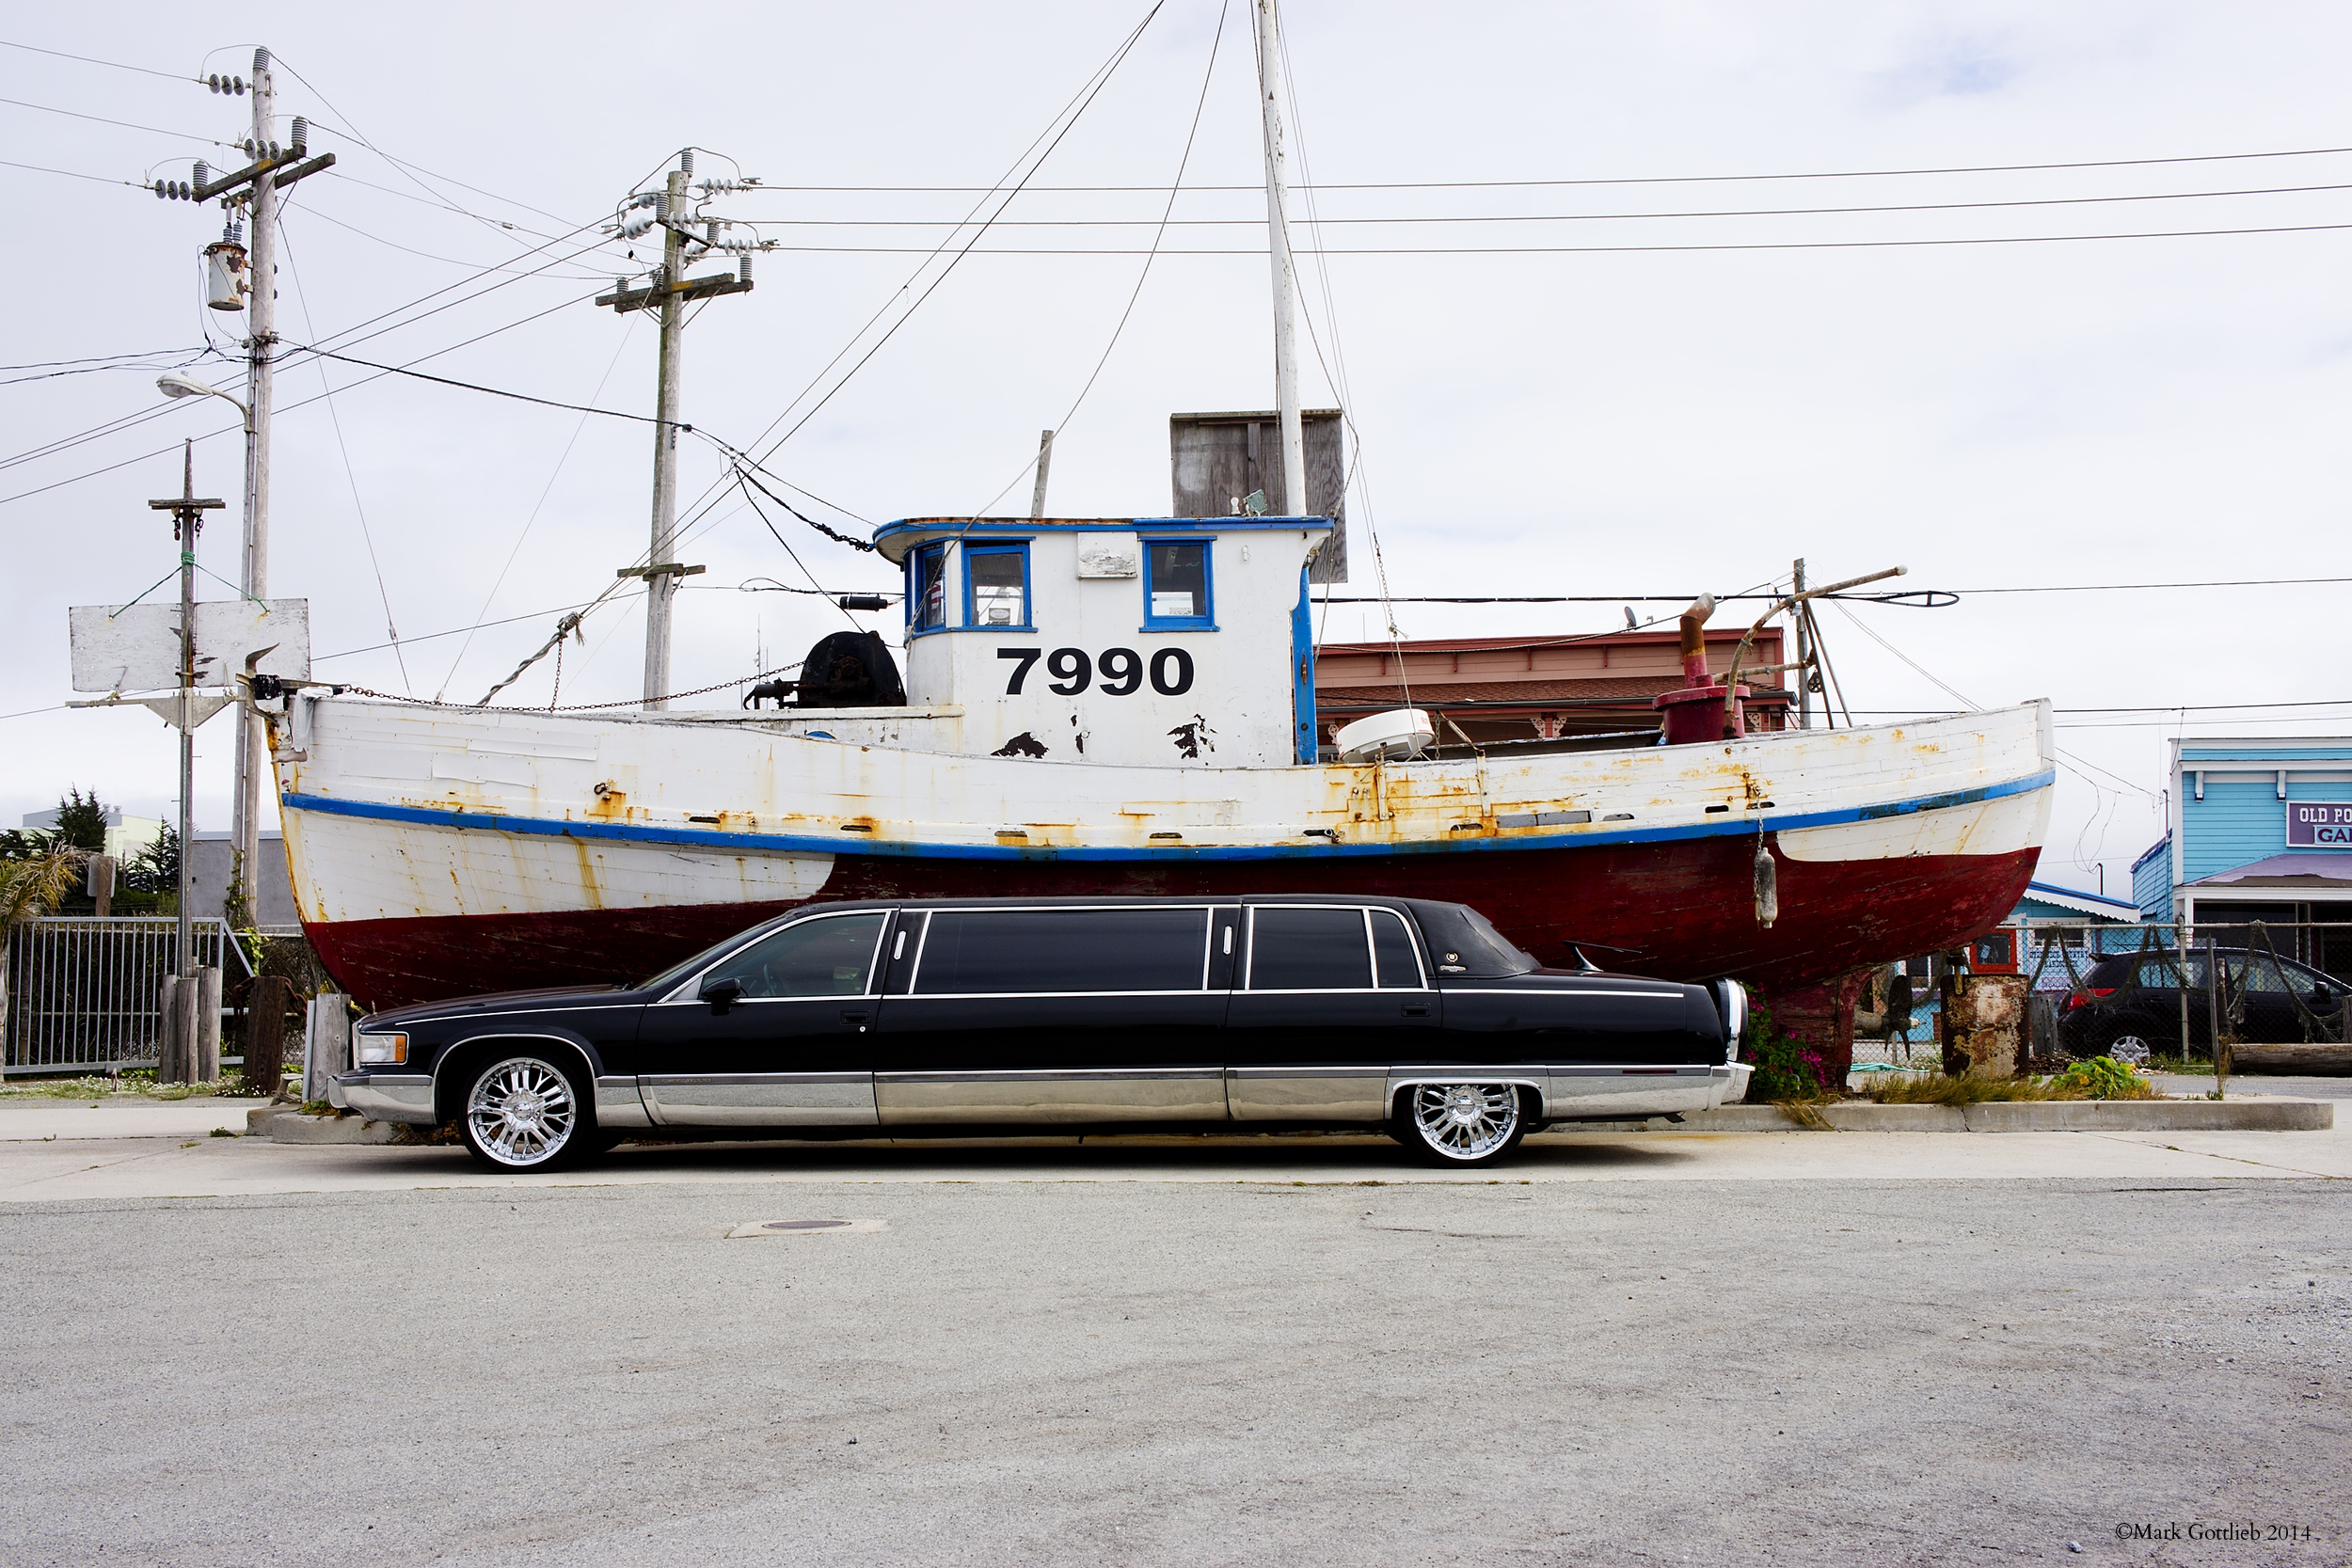 Extended Limo and Fishing Boat